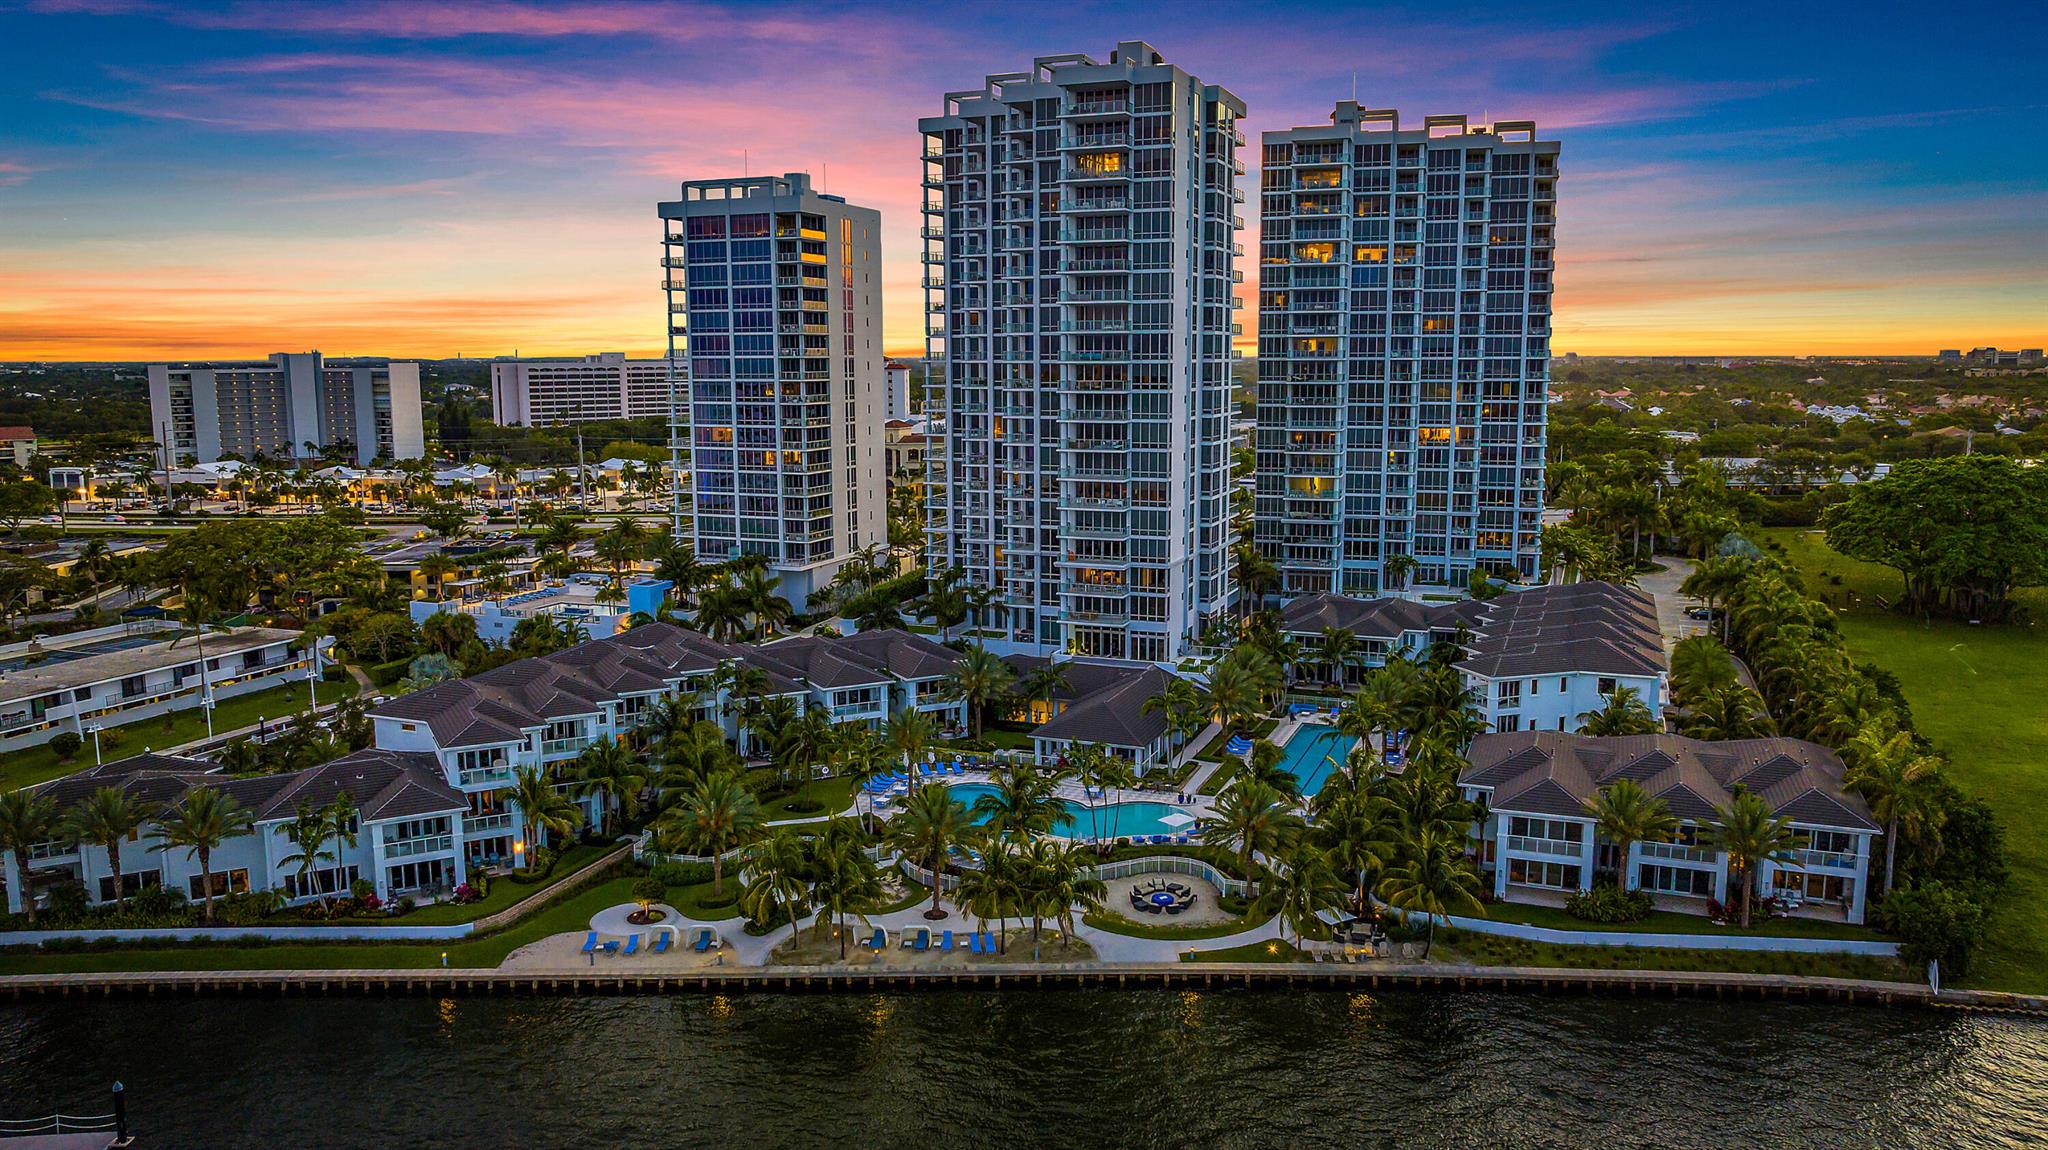 BEAUTIFULLY UPDATED AND DECORATED 9TH FLOOR CORNER RESIDENCE WITH STUNNING PANORAMIC VIEWS OF THE INTRACOASTAL, OCEAN, MARINAS AND CITY LIGHTS. ELEVATOR TAKES YOU DIRECTLY TO YOUR PRIVATE FOYER.  WONDERFULLY APPOINTED THROUGHOUT WITH DESIGNER FINISHES WHICH INCLUDE LARGE TILE FLOORS, CUSTOM LIGHTING, WINDOW TREATMENTS. ISLAND KITCHEN, NEW CARPETING. ABSOLUTELY WONDERFUL FINISHES AND COLOR SCHEMES CREATE AN INVITING SPACE WITH THE OPTION OF 3 FULL BEDROOMS OR 2 BEDROOMS WITH AN AMAZING OFFICE SPACE . THE MASTER BEDROOM IS A TRUE RETREAT WITH BEAUTIFUL VIEWS AND AN EXQUISITE MASTER BATHROOM WITH DUAL SINKS, WATER CLOSET, SPA TUB AND SPACIOUS CUSTOM CLOSET WITH BUILTINS. THE KITCHEN IS ACCENTED WITH A LARGE ISLAND WITH SEATING AND DECORATIVE RANGE HOOD.